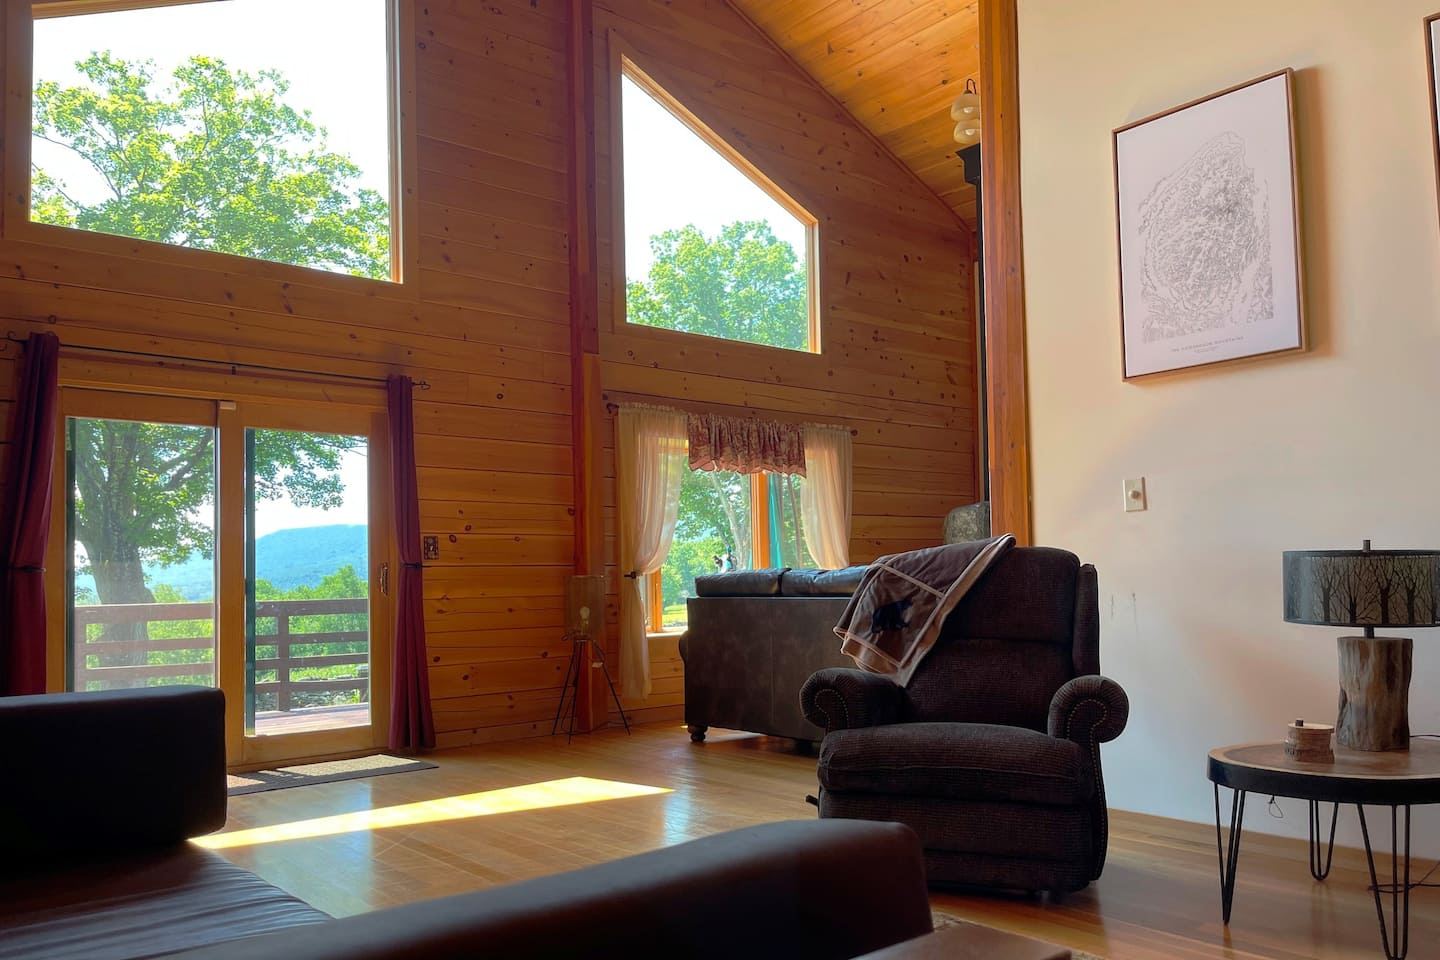 Sitting area in the entry. The Cozy starts here! Huge windows let the mountain views inside!